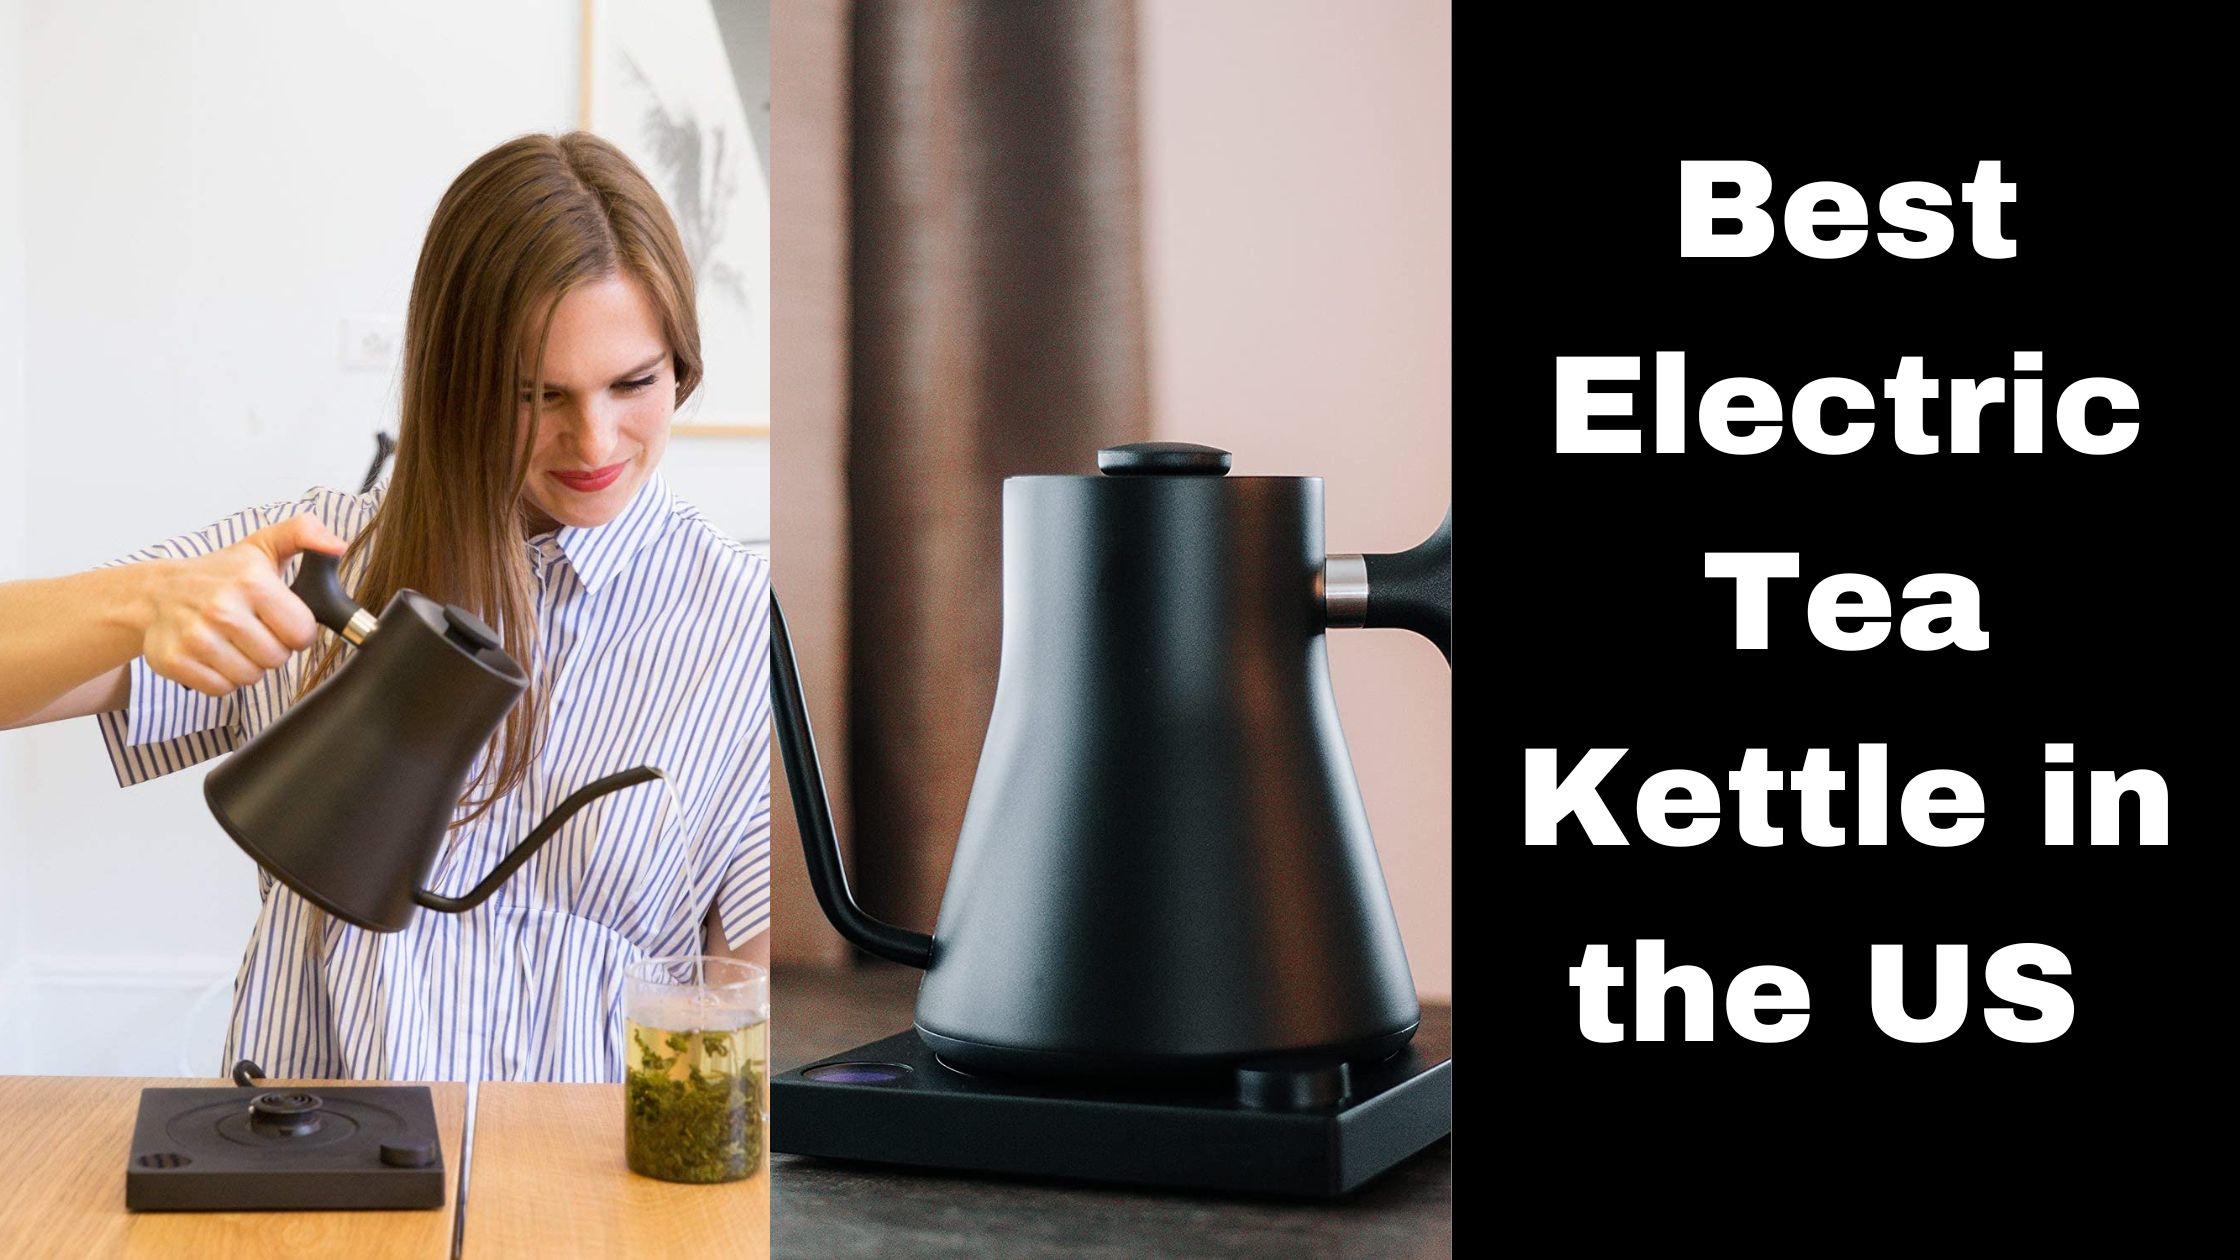 Best Electric tea Kettle in the US